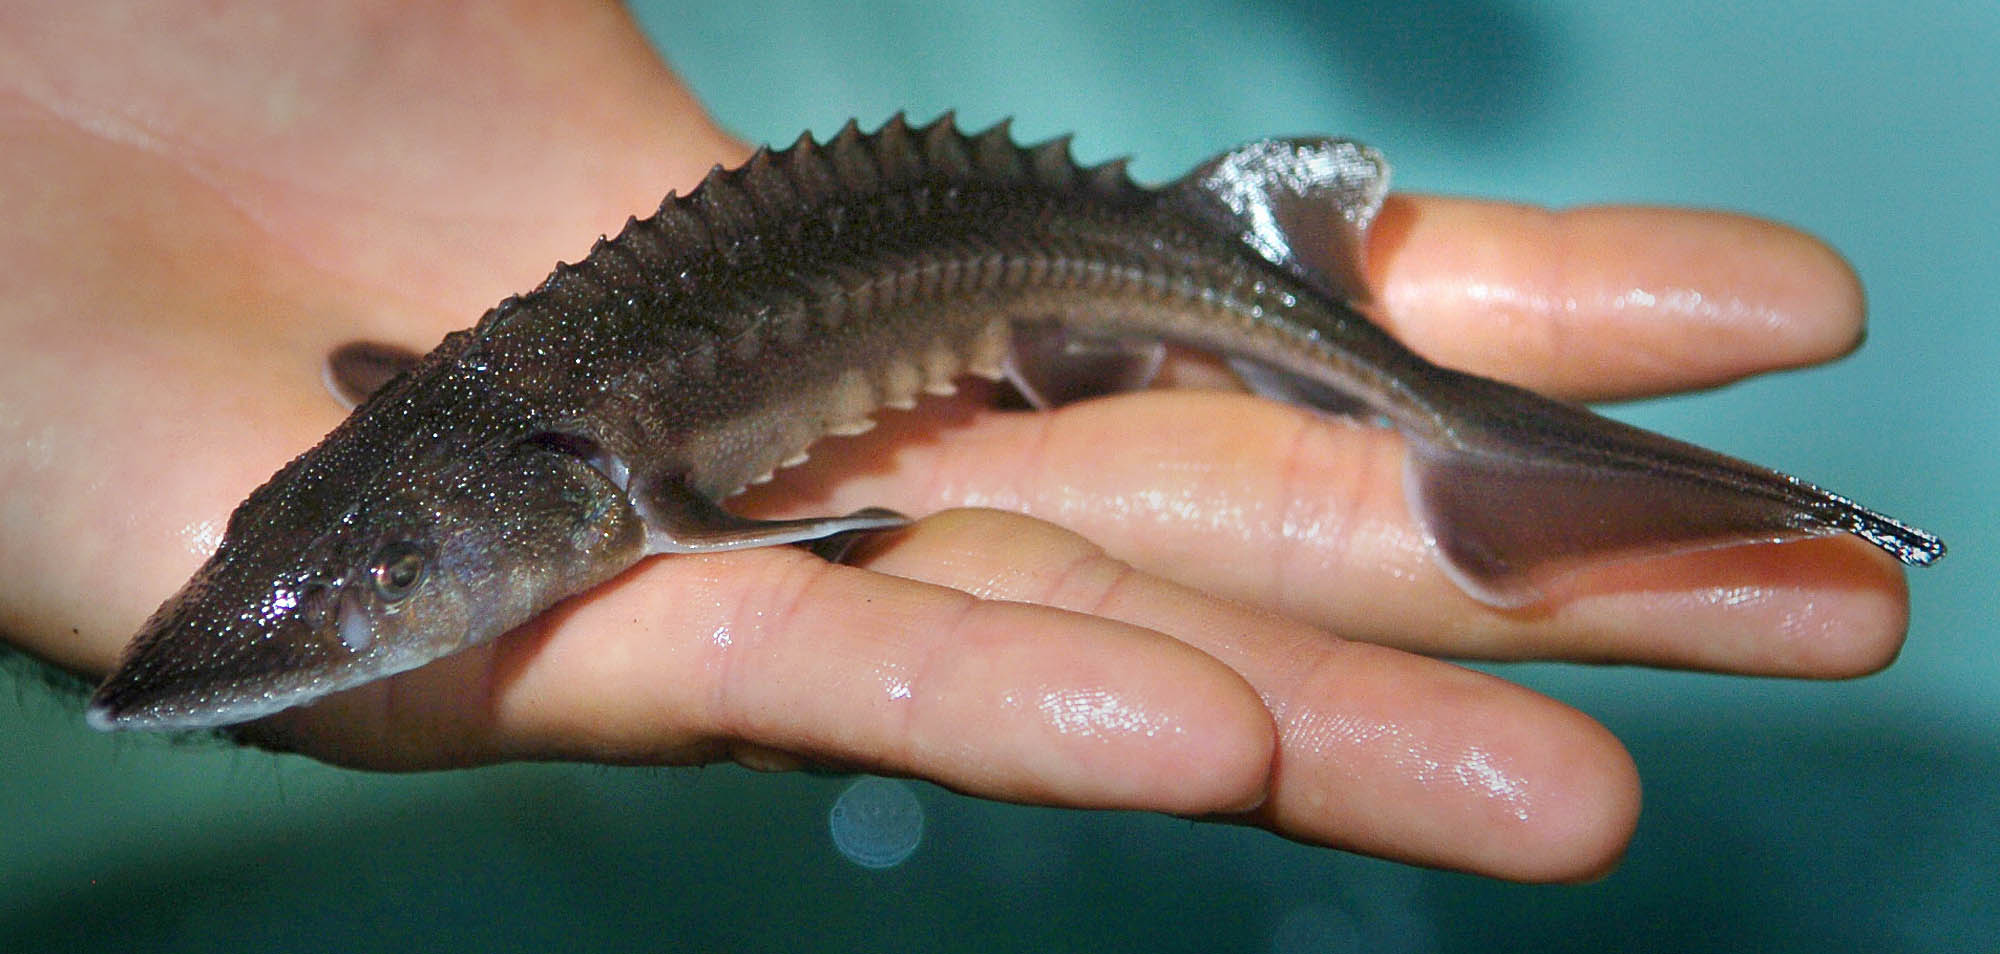 Production of young sturgeon in the lower Columbia River appears to be suffering.